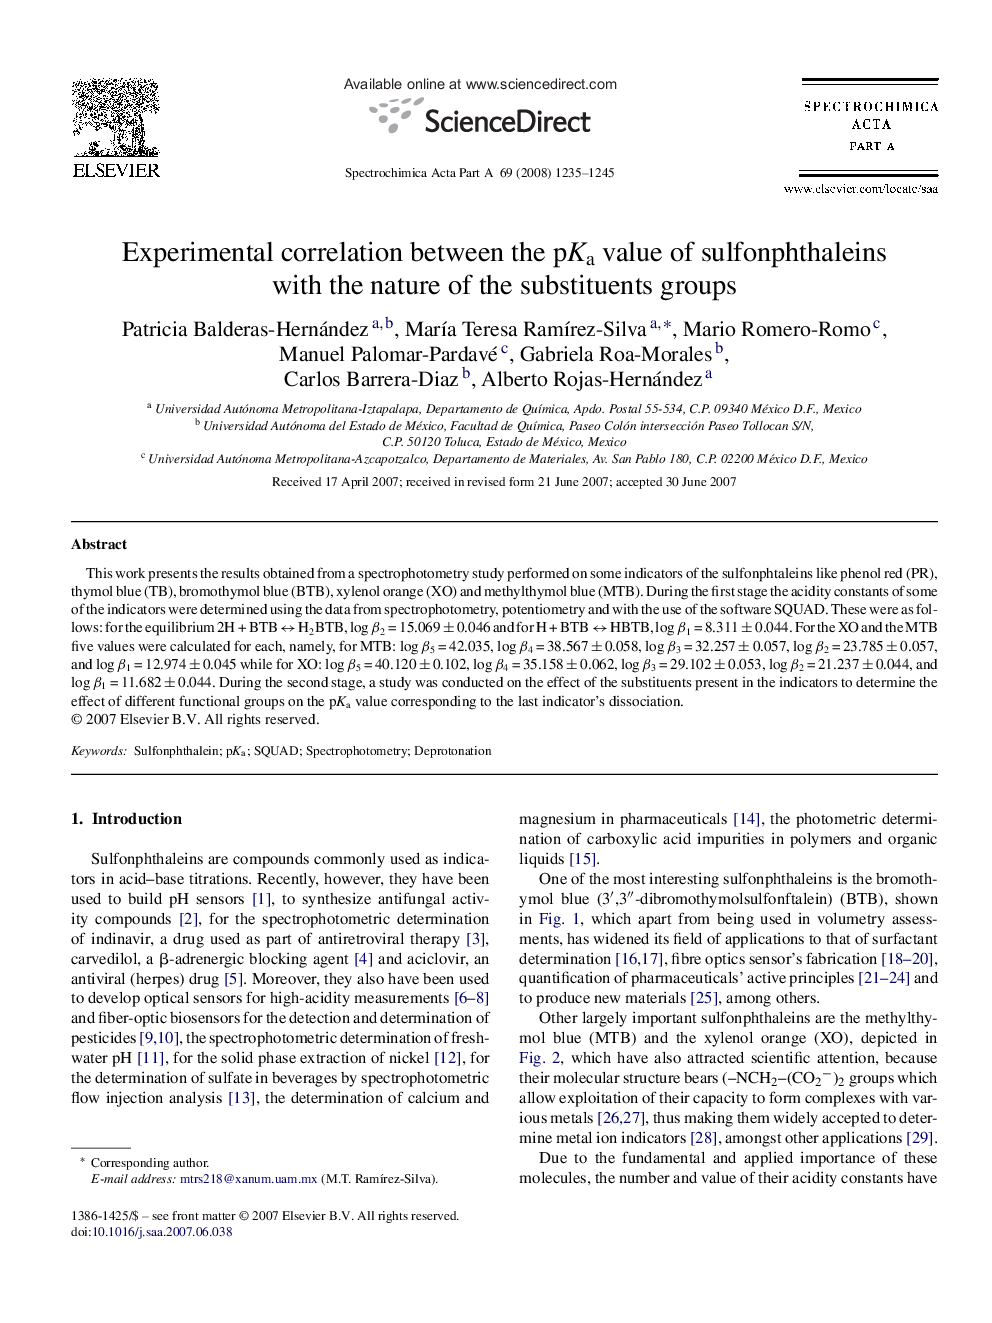 Experimental correlation between the pKa value of sulfonphthaleins with the nature of the substituents groups